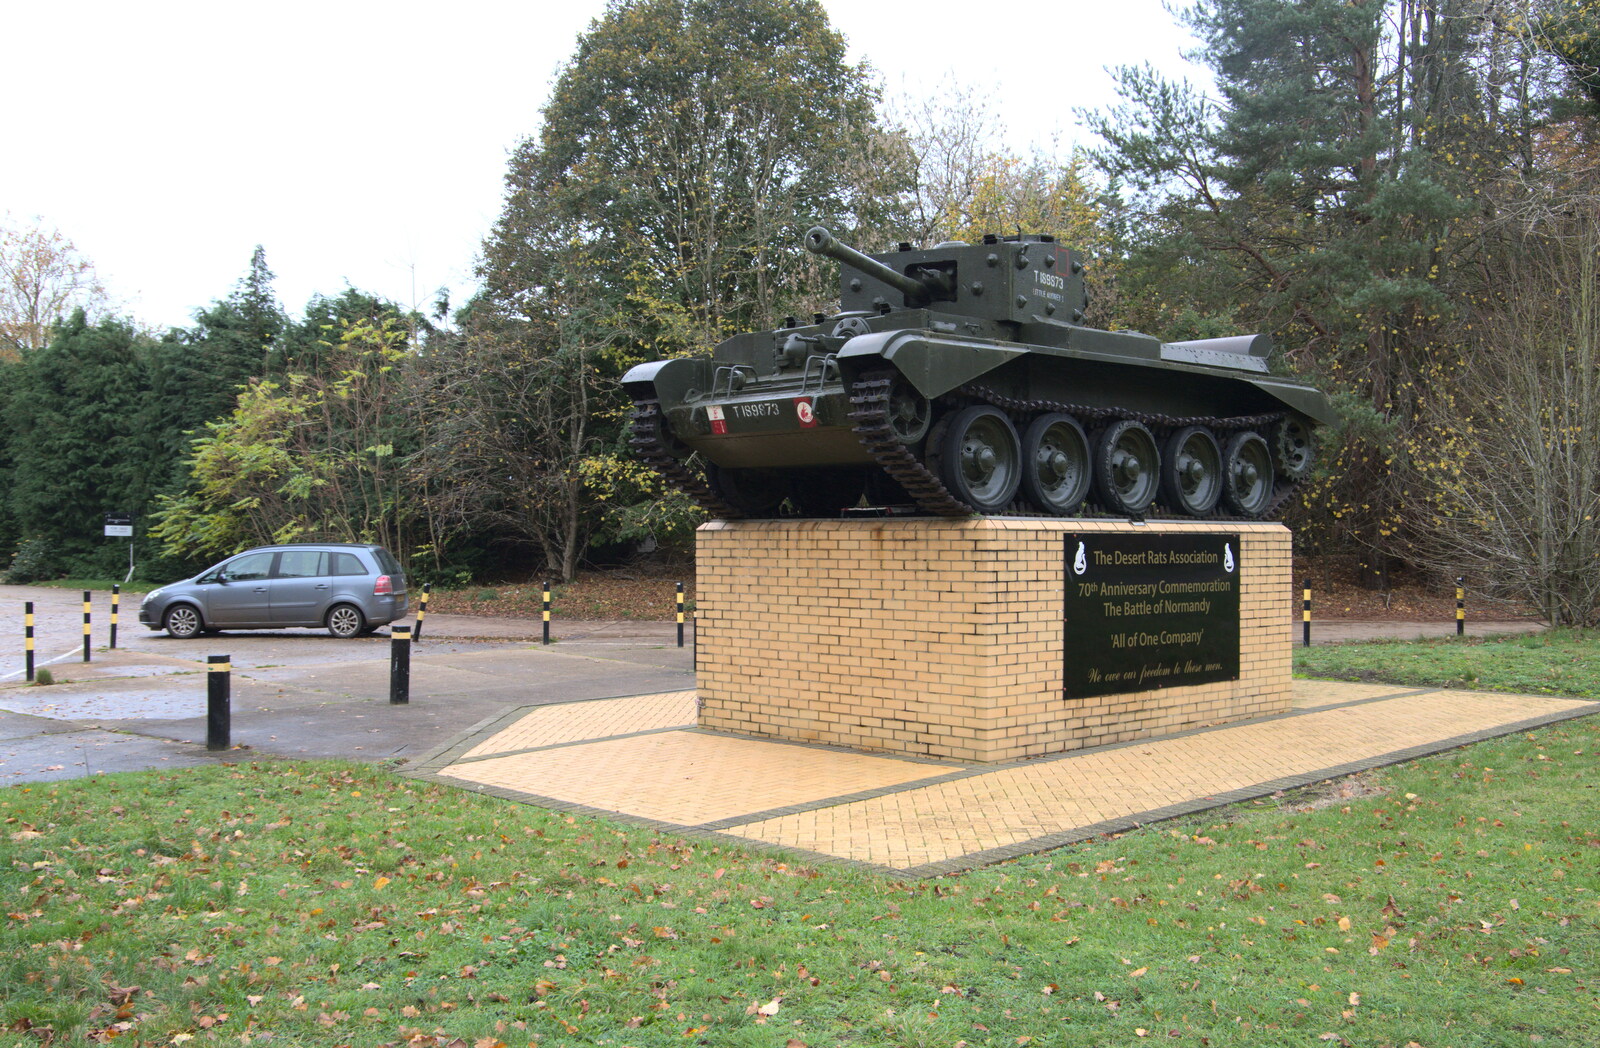 Down the road from the hotel, there's a tank from A Trip to Sandringham Estate, Norfolk - 31st October 2020